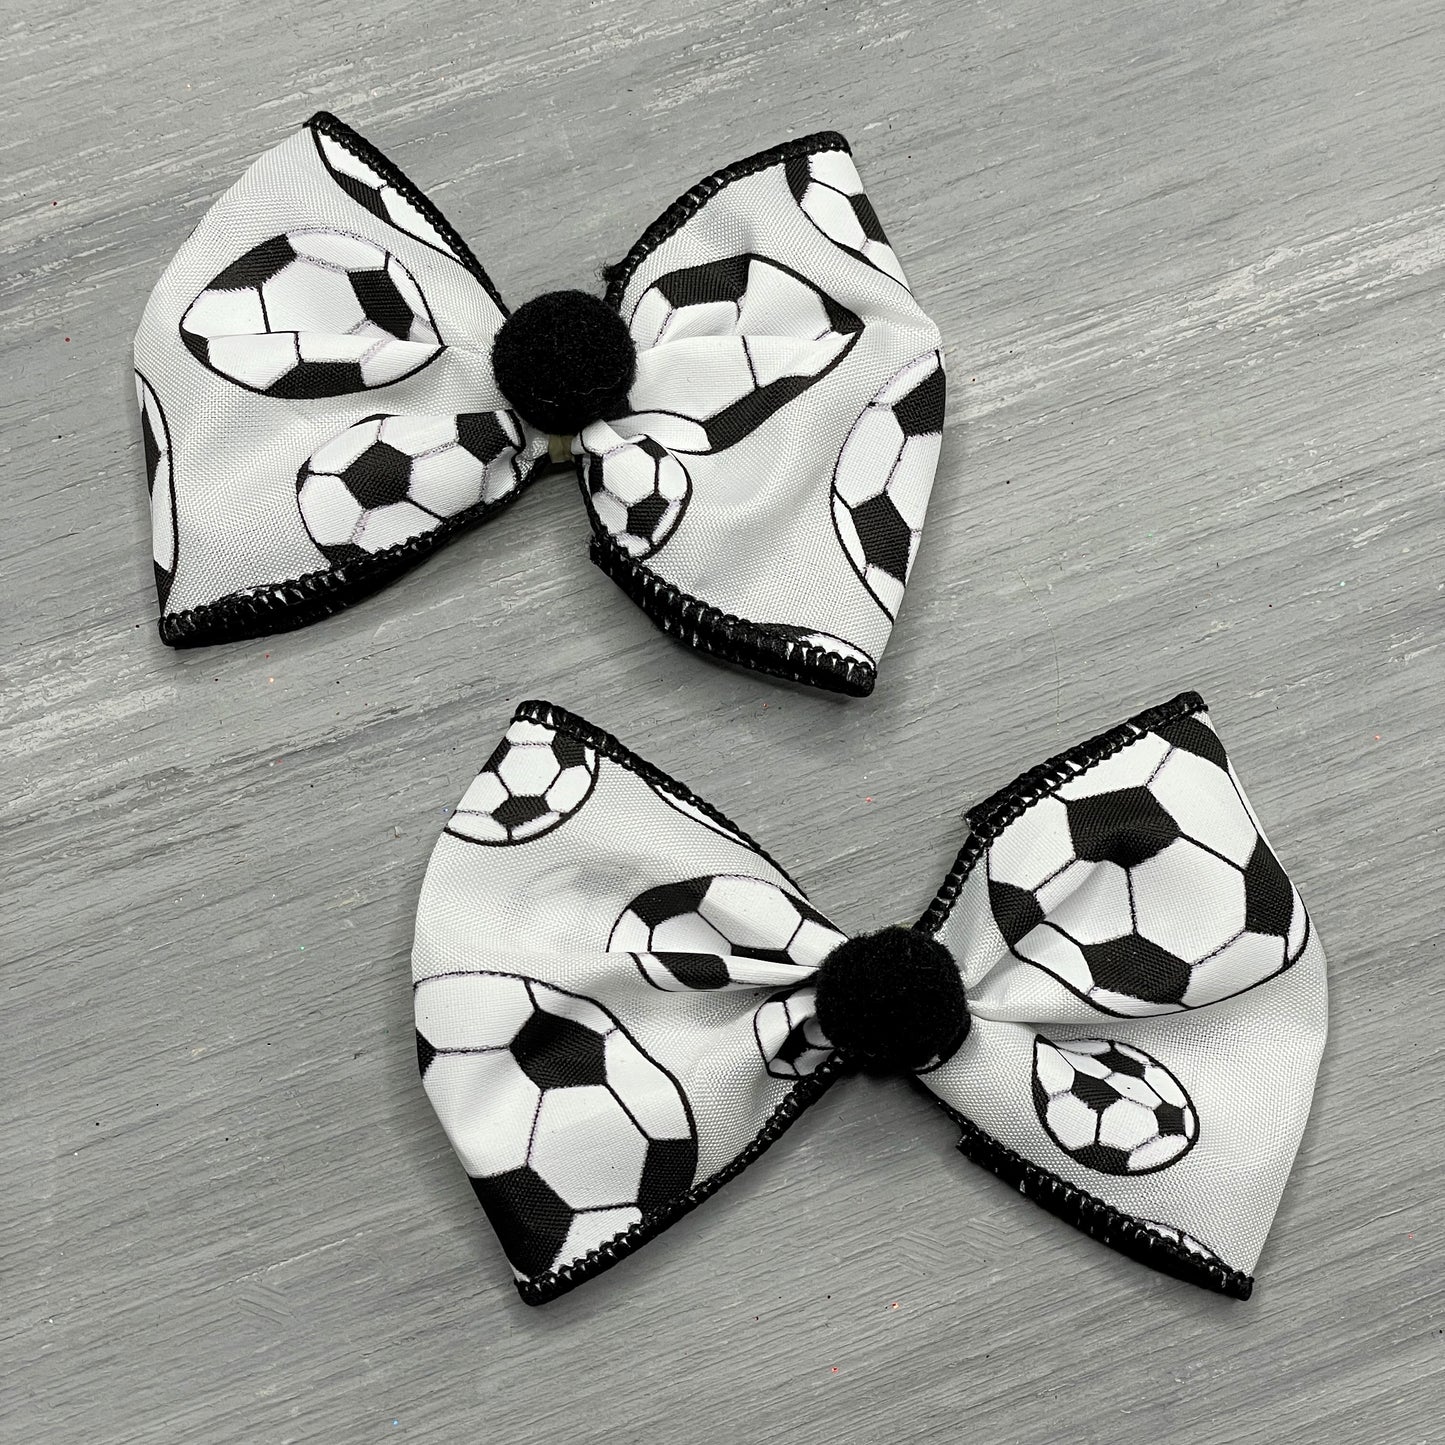 Soccer Dog - Over The Top  - 4 Large Bows